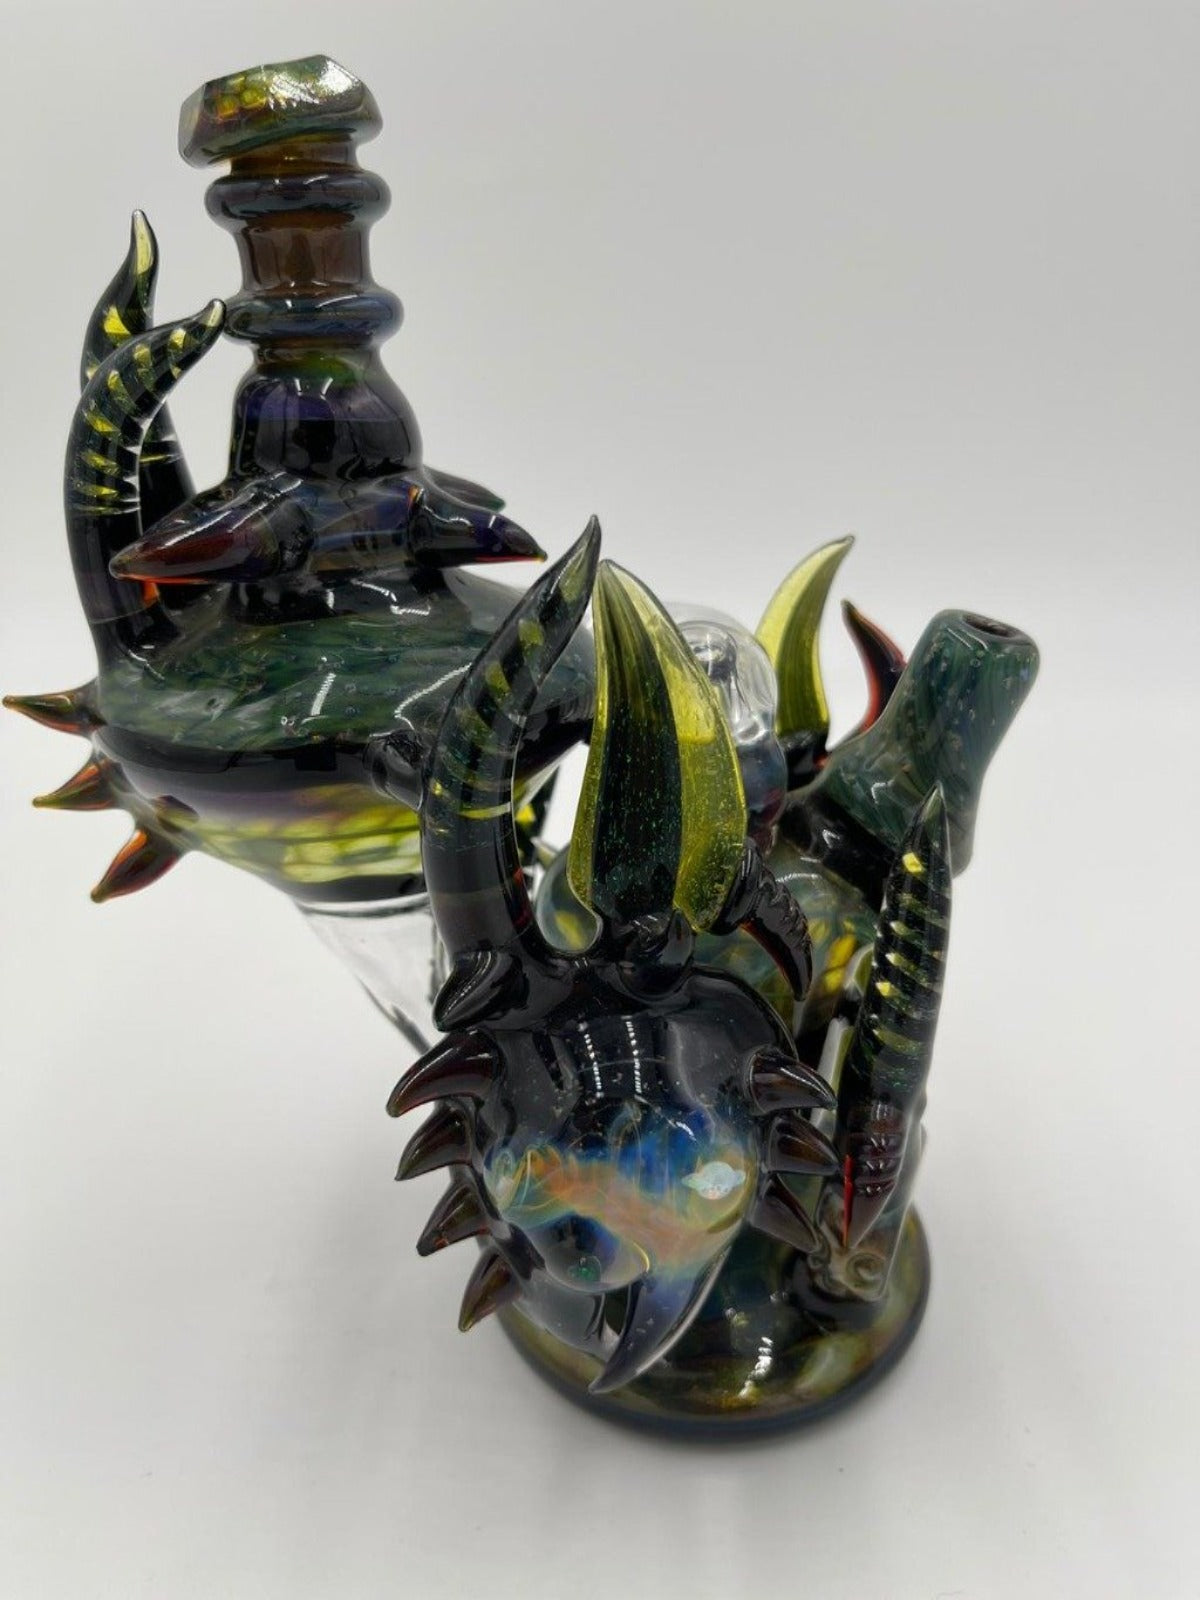 Heady Recycler made by Merc Glass